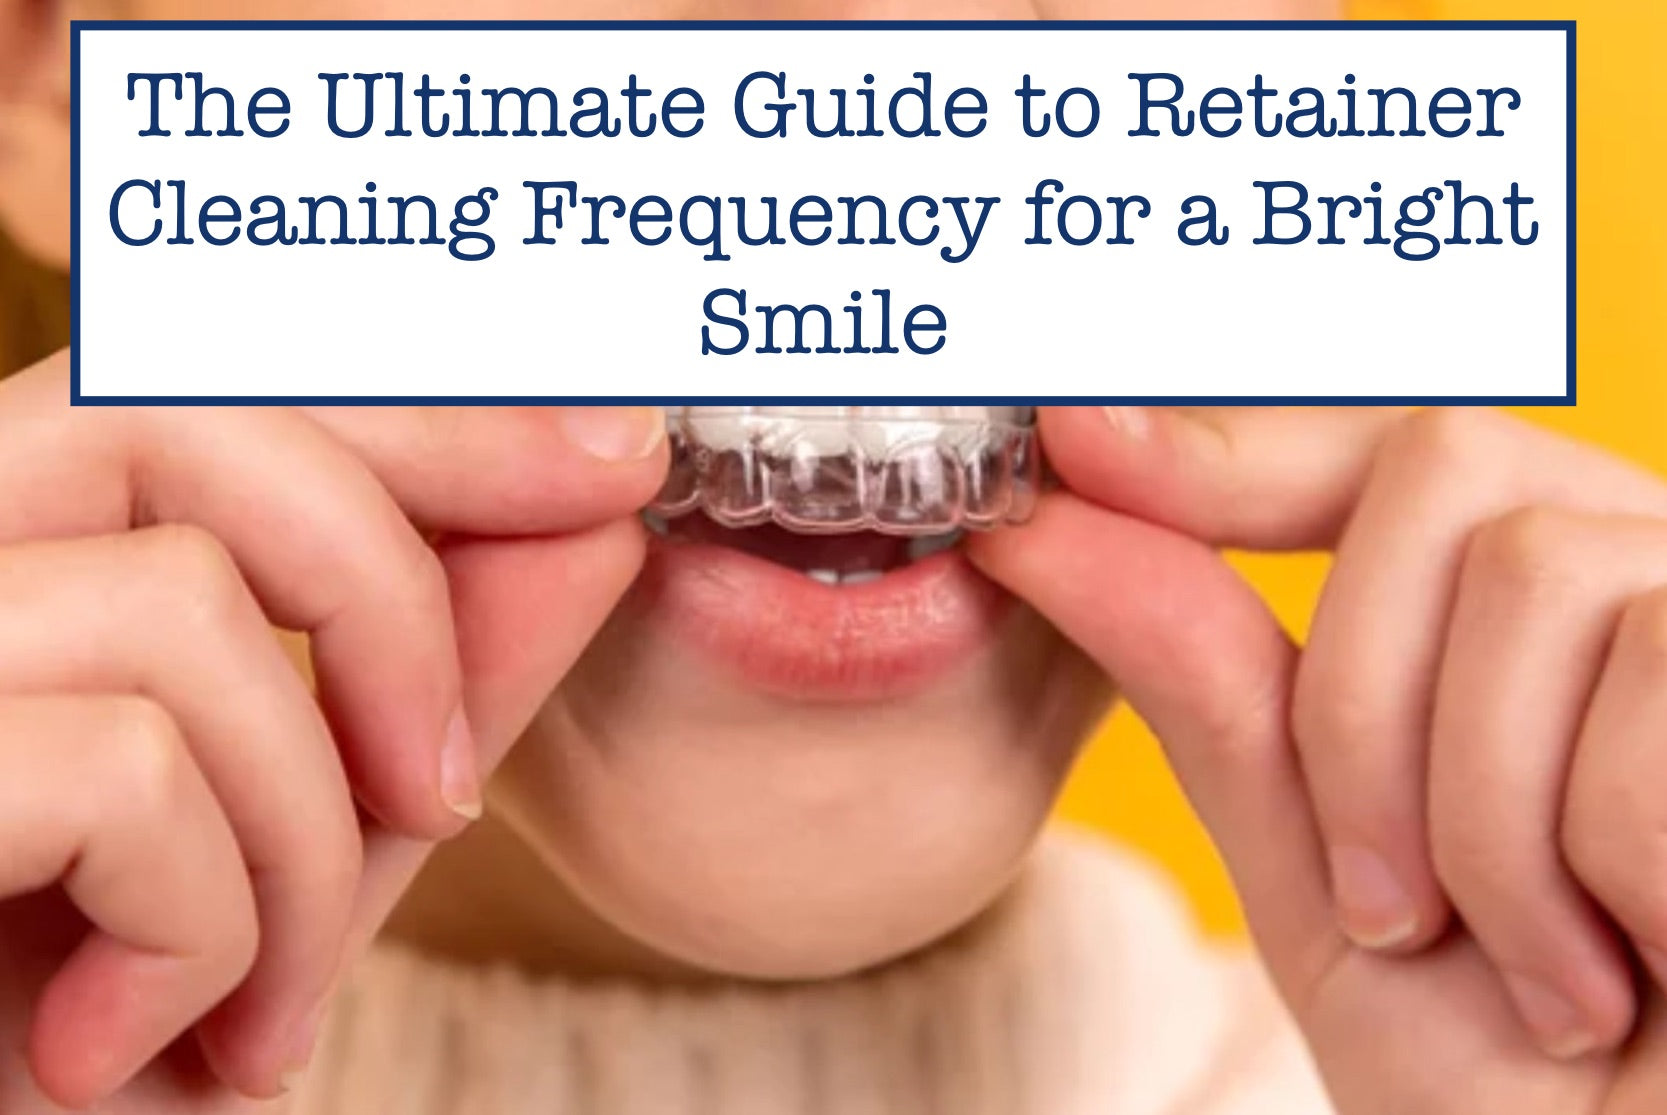 The Ultimate Guide to Retainer Cleaning Frequency for a Bright Smile